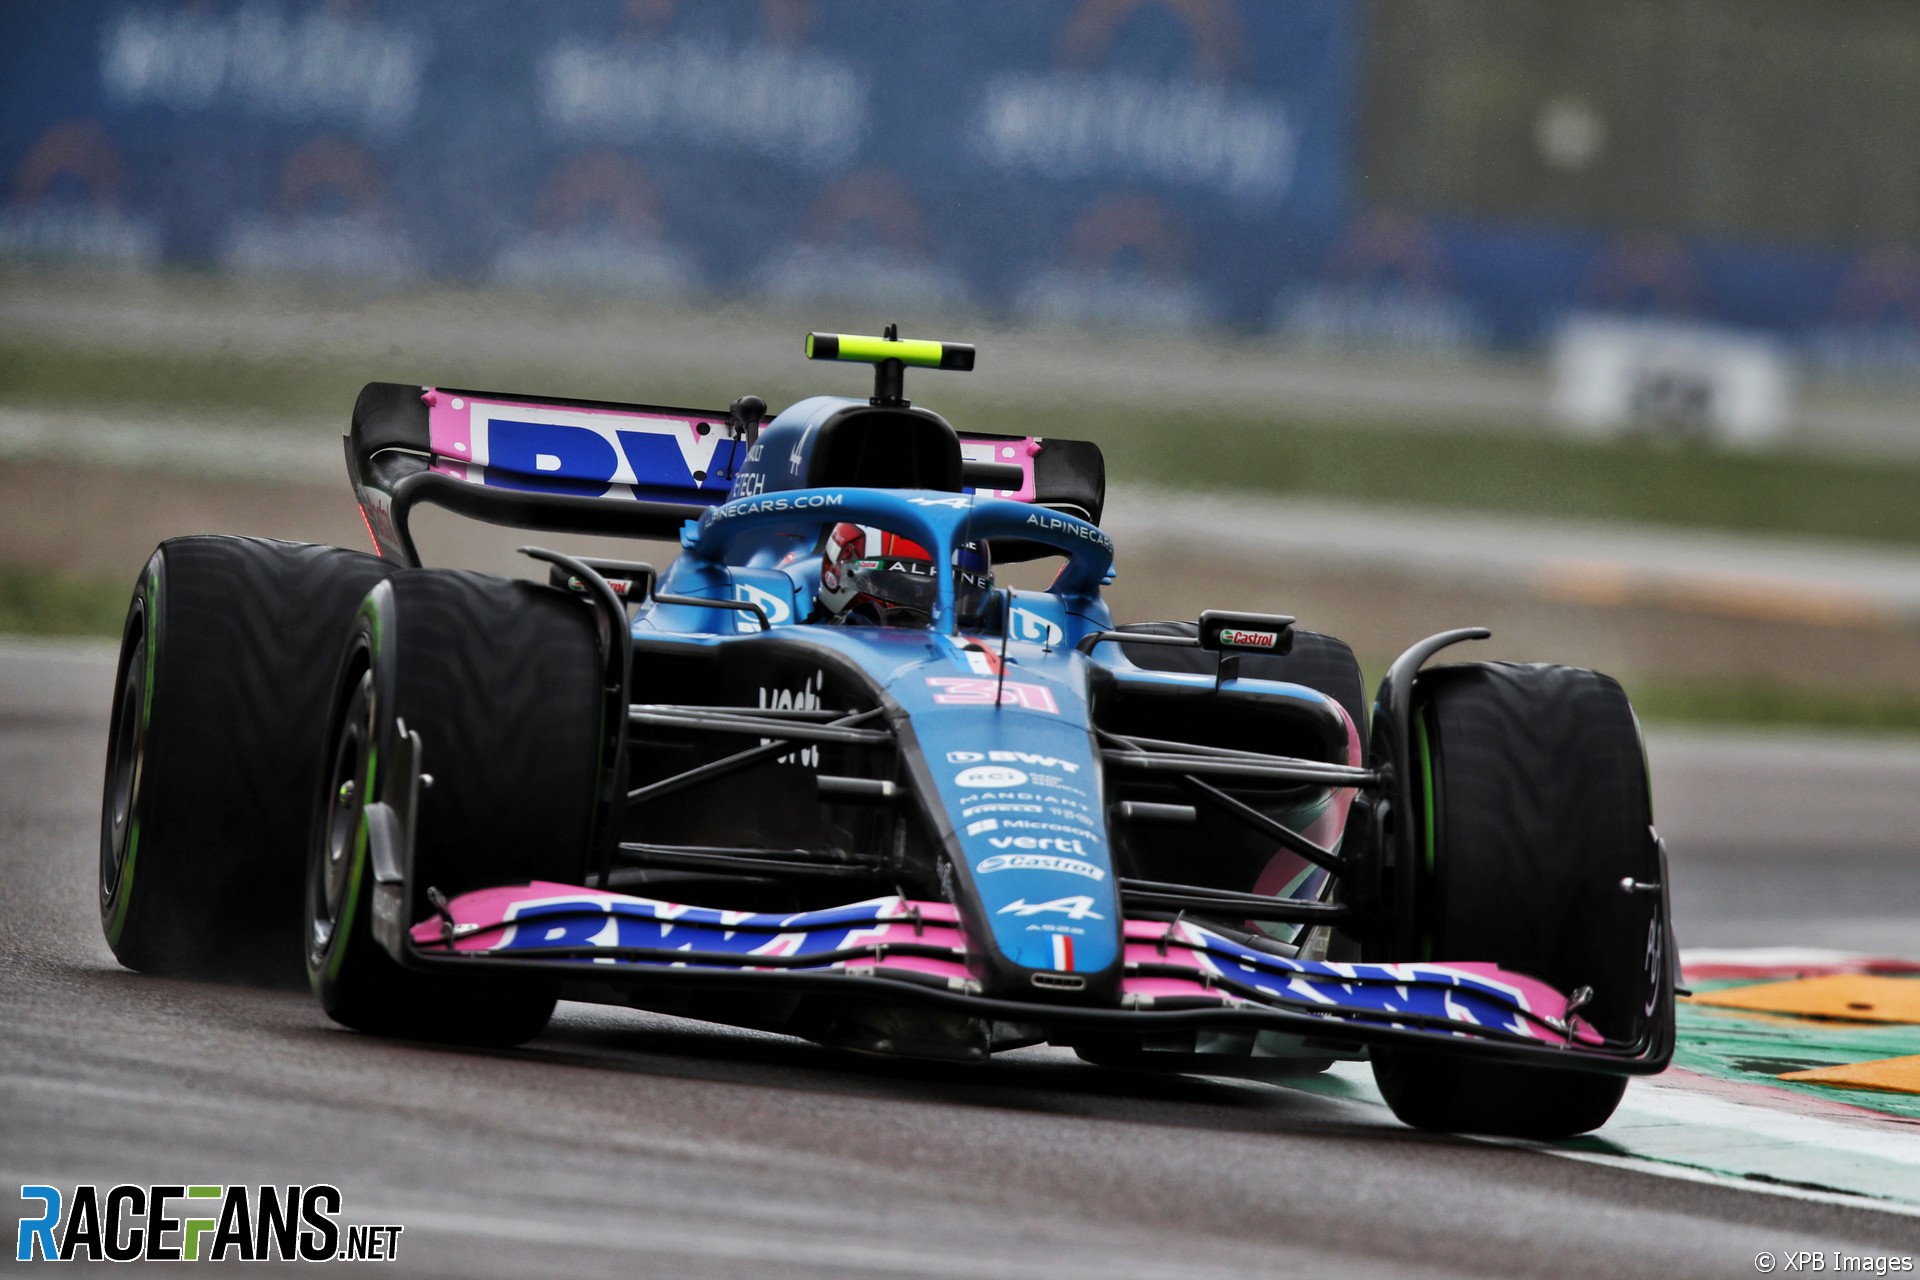 Ocon expects “good gain” from first run with Alpine’s new floor in Miami | RaceFans Round-up